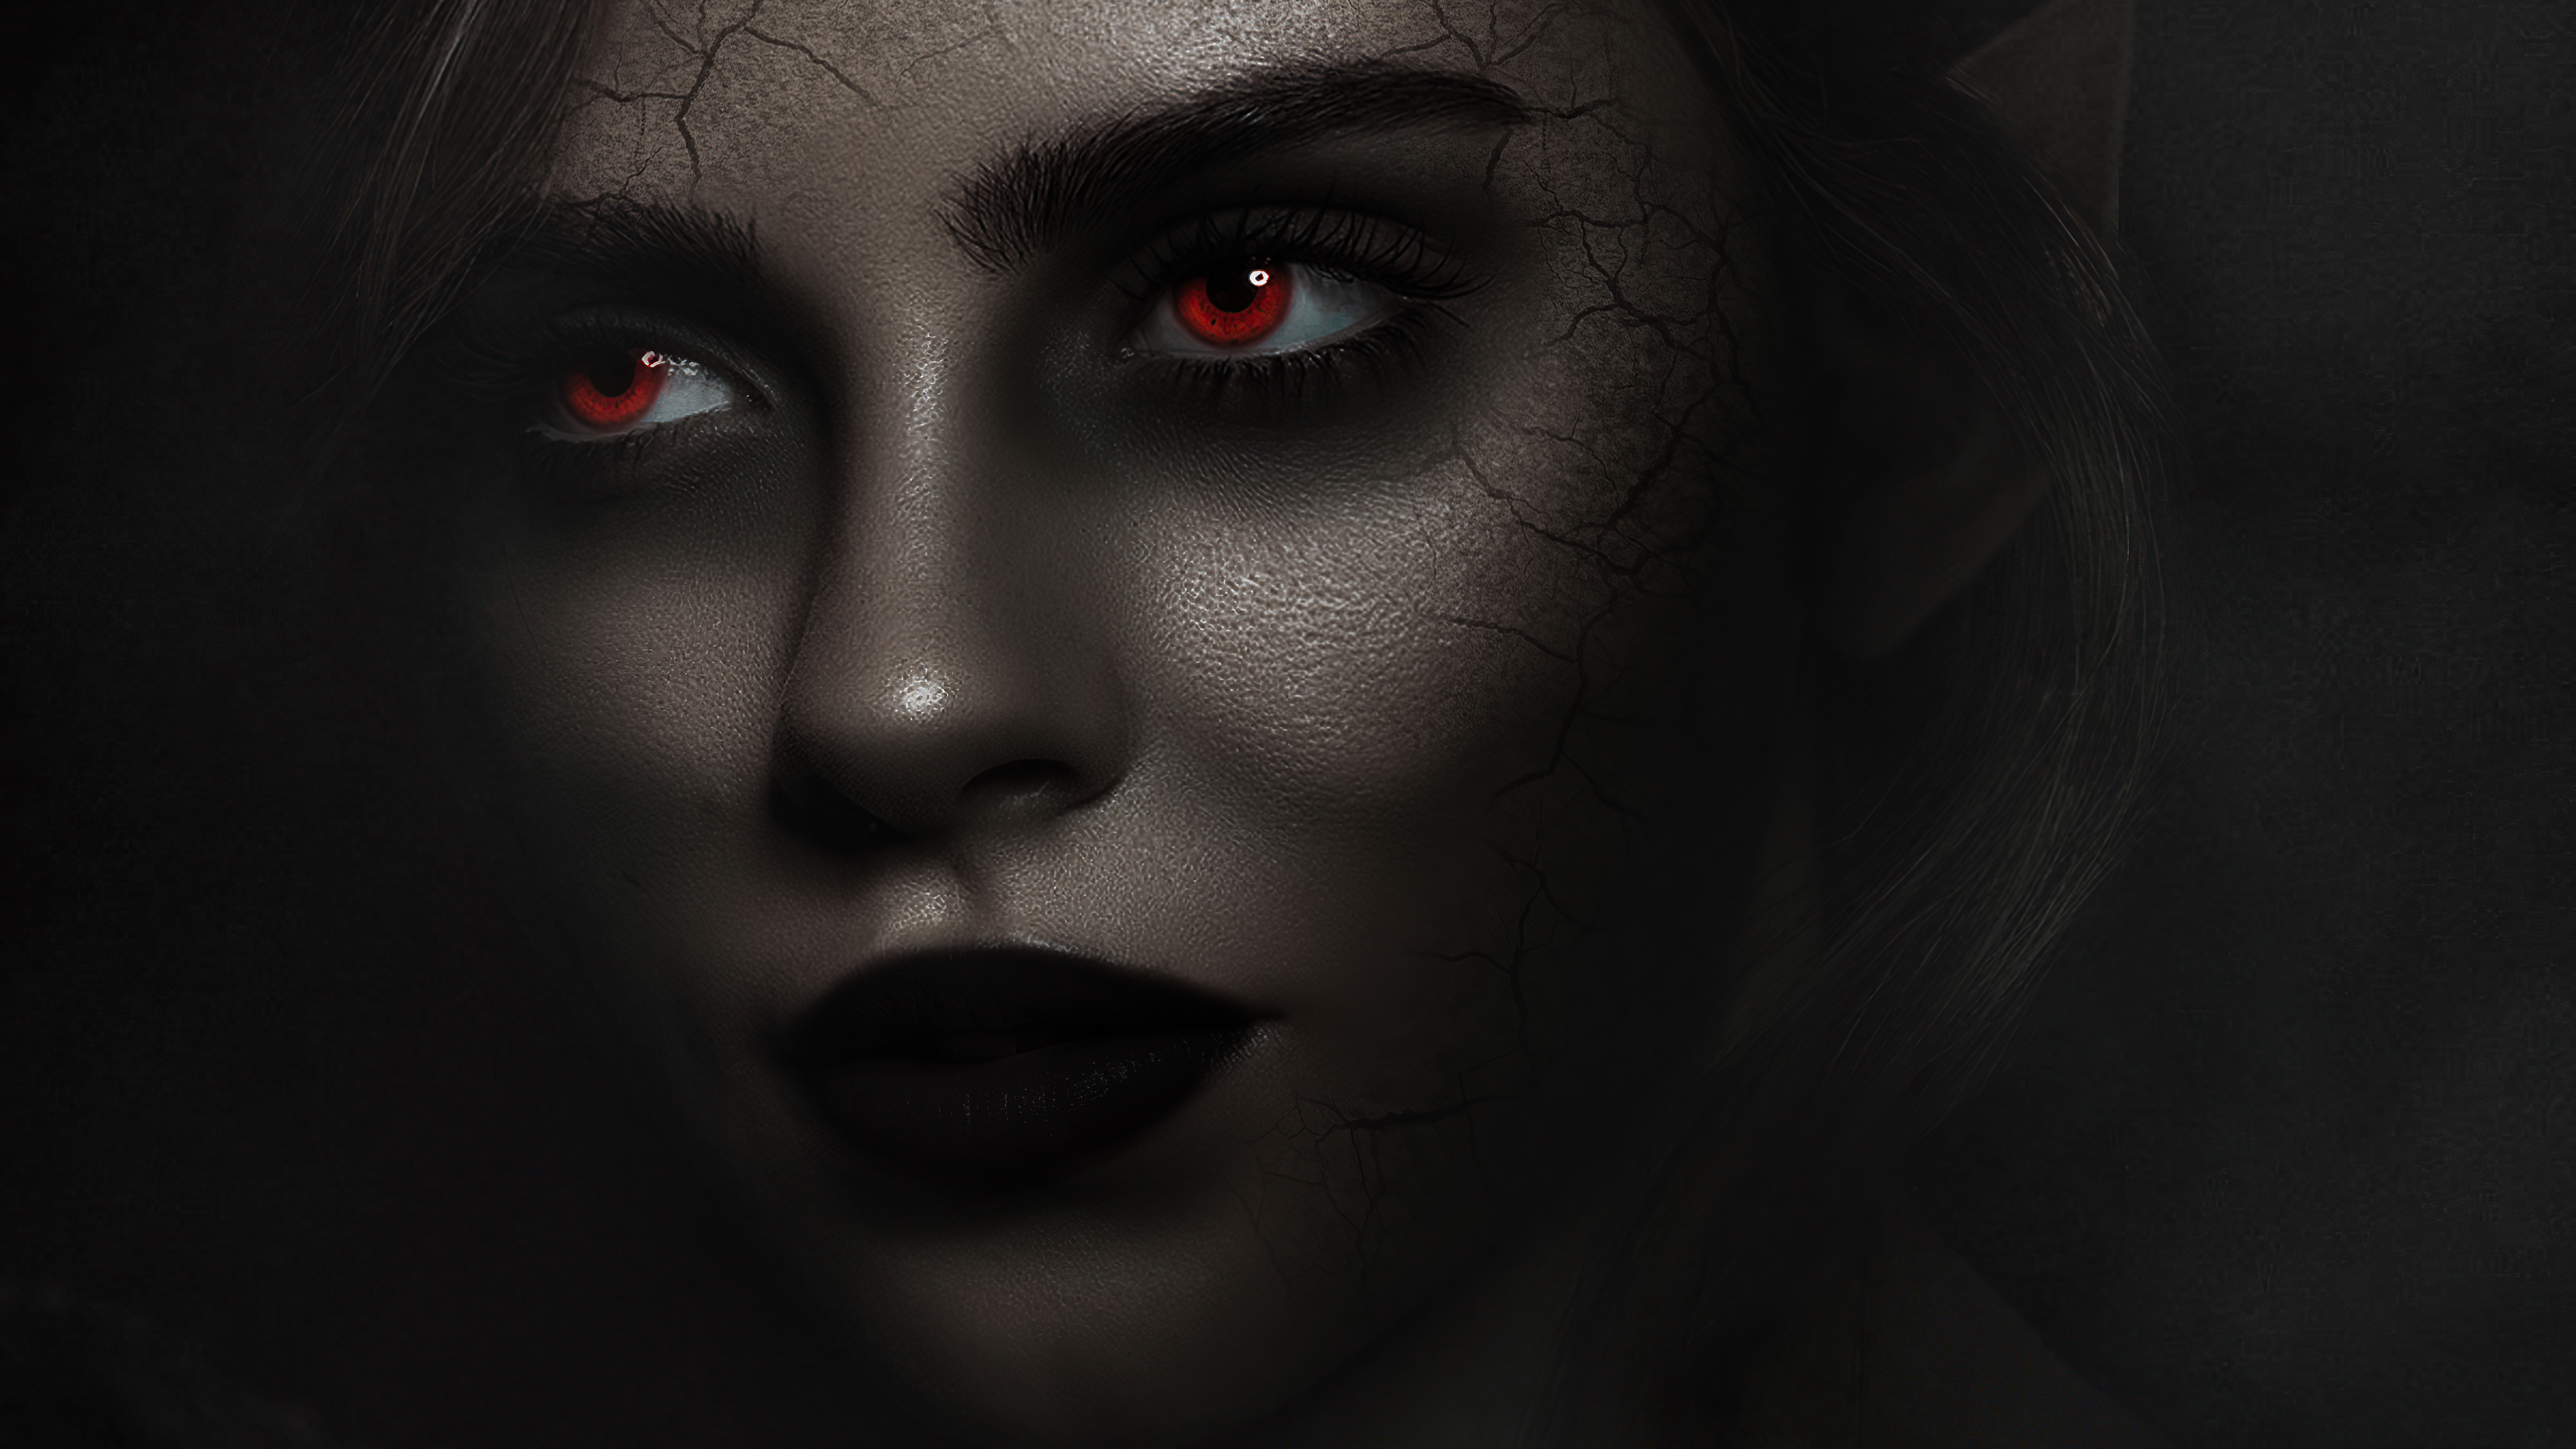 Rendering of a girl with red eyes on a dark background